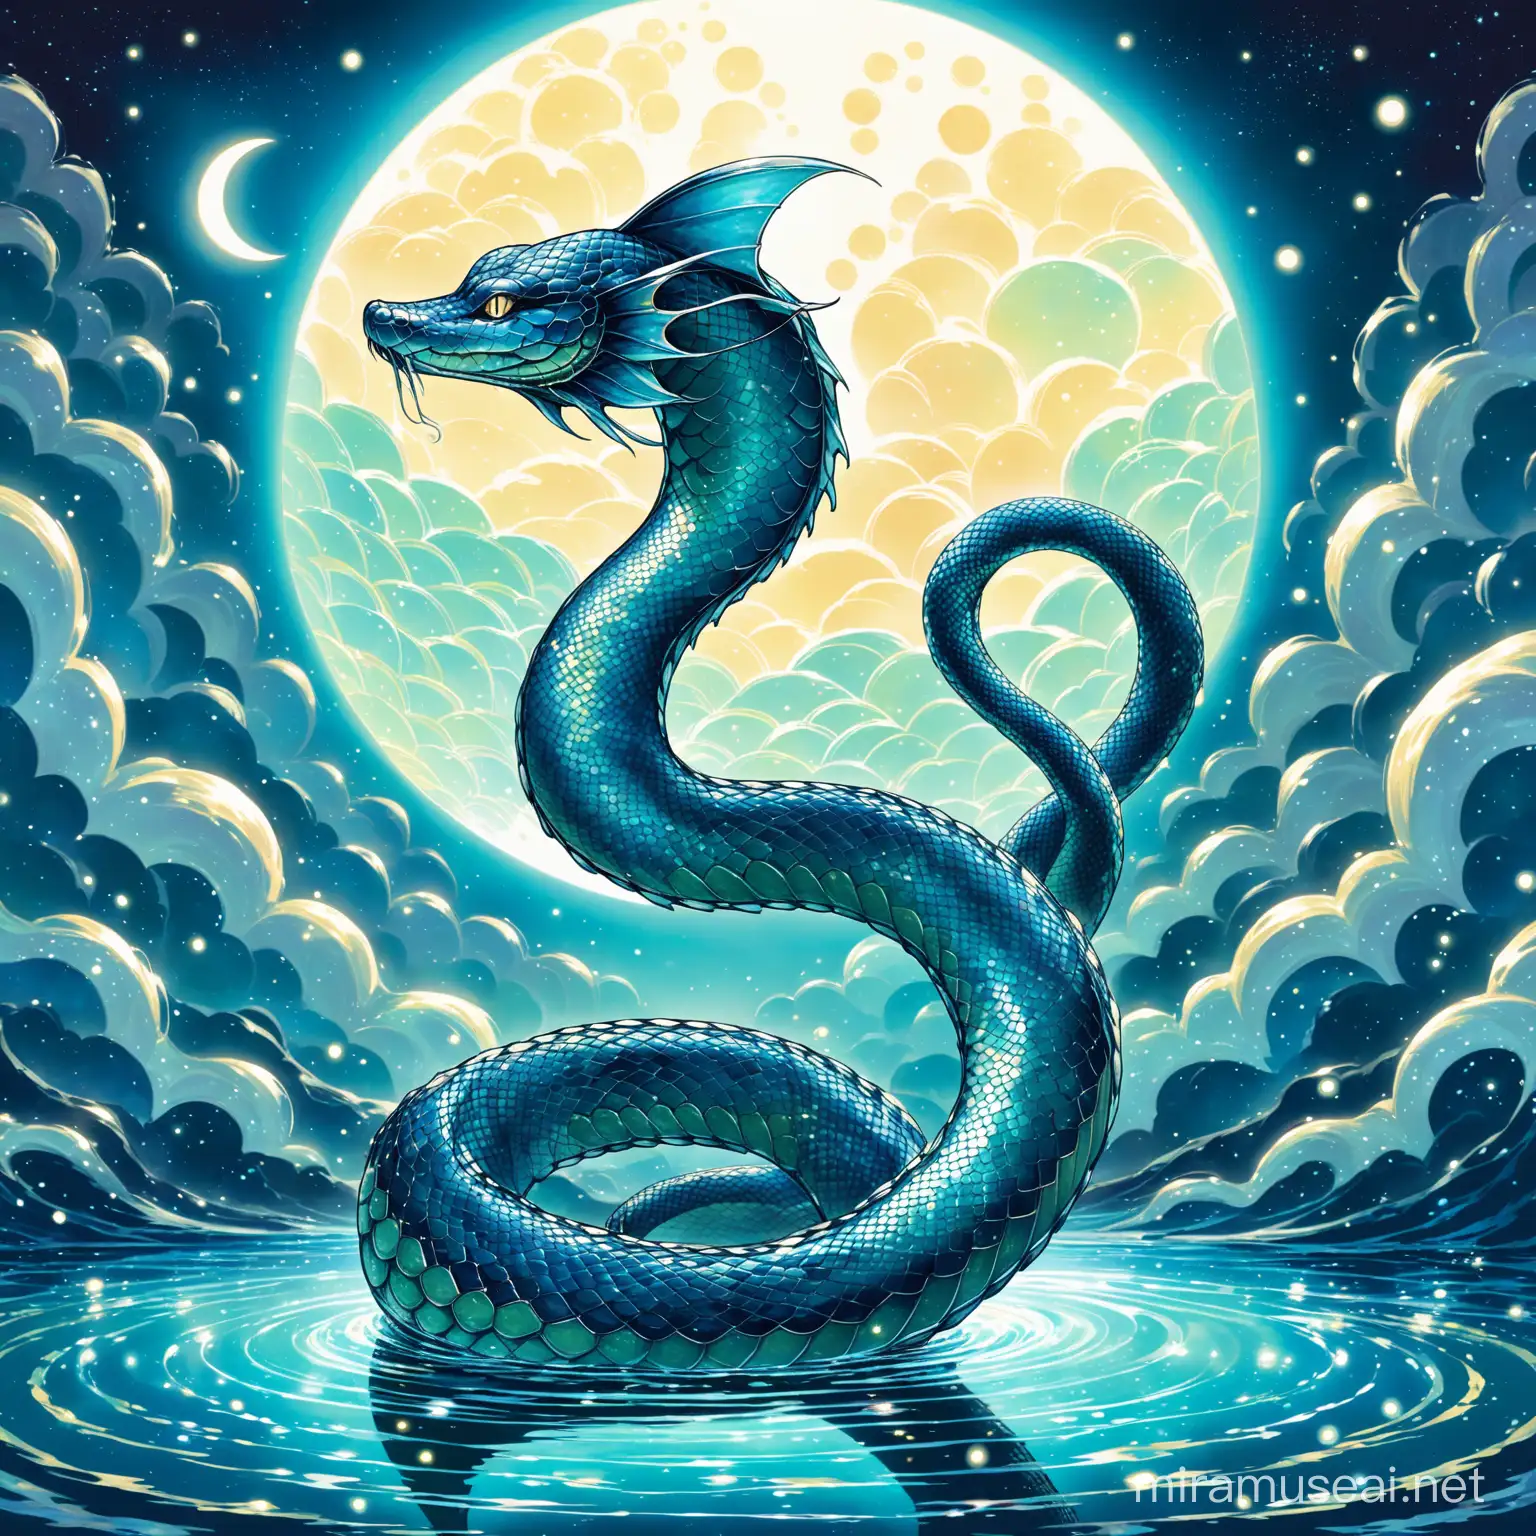 depicted as a serpent of shimmering scales, with eyes that gleam like lunar reflections on still waters, rather a force of nature that operates according to the inscrutable whims of the moon. Blue. Sharp  dorsal fin.  more serpent like